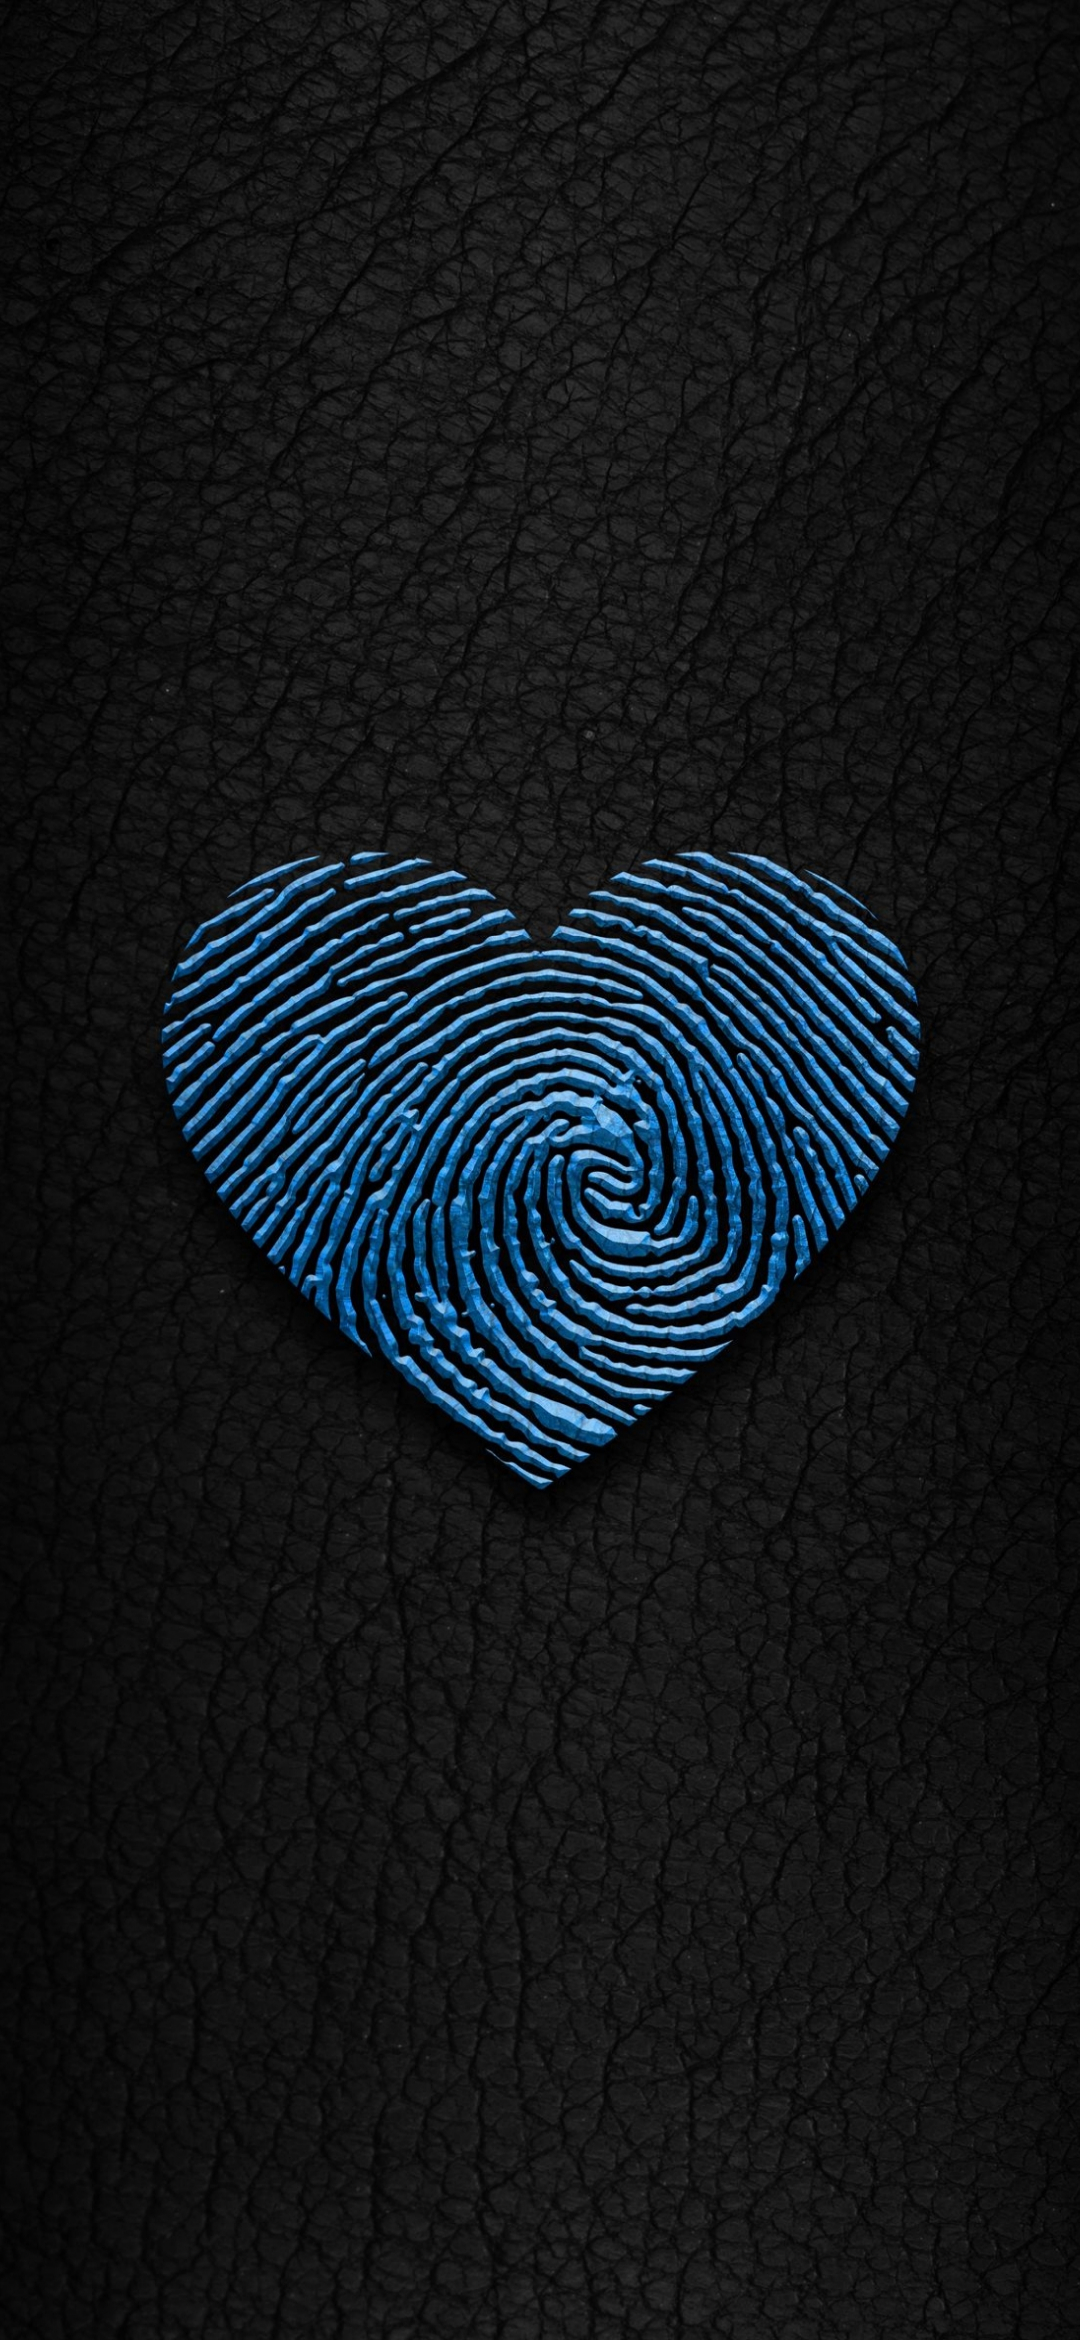 Wallpaper Hand Human Body Electric Blue Pattern Heart Background   Download Free Image